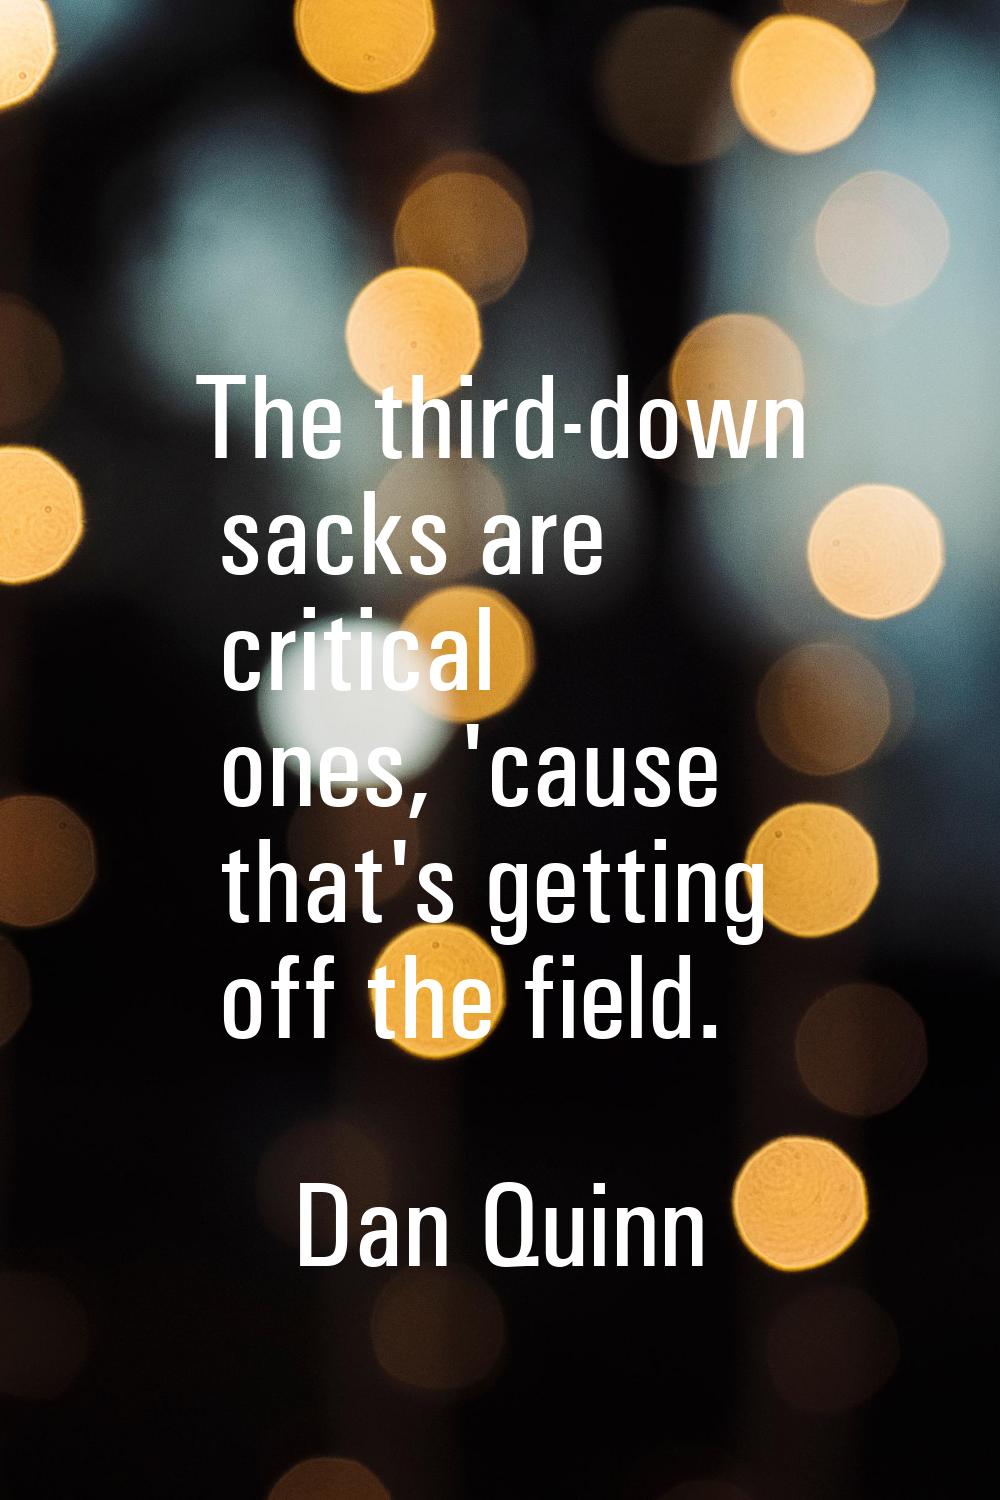 The third-down sacks are critical ones, 'cause that's getting off the field.